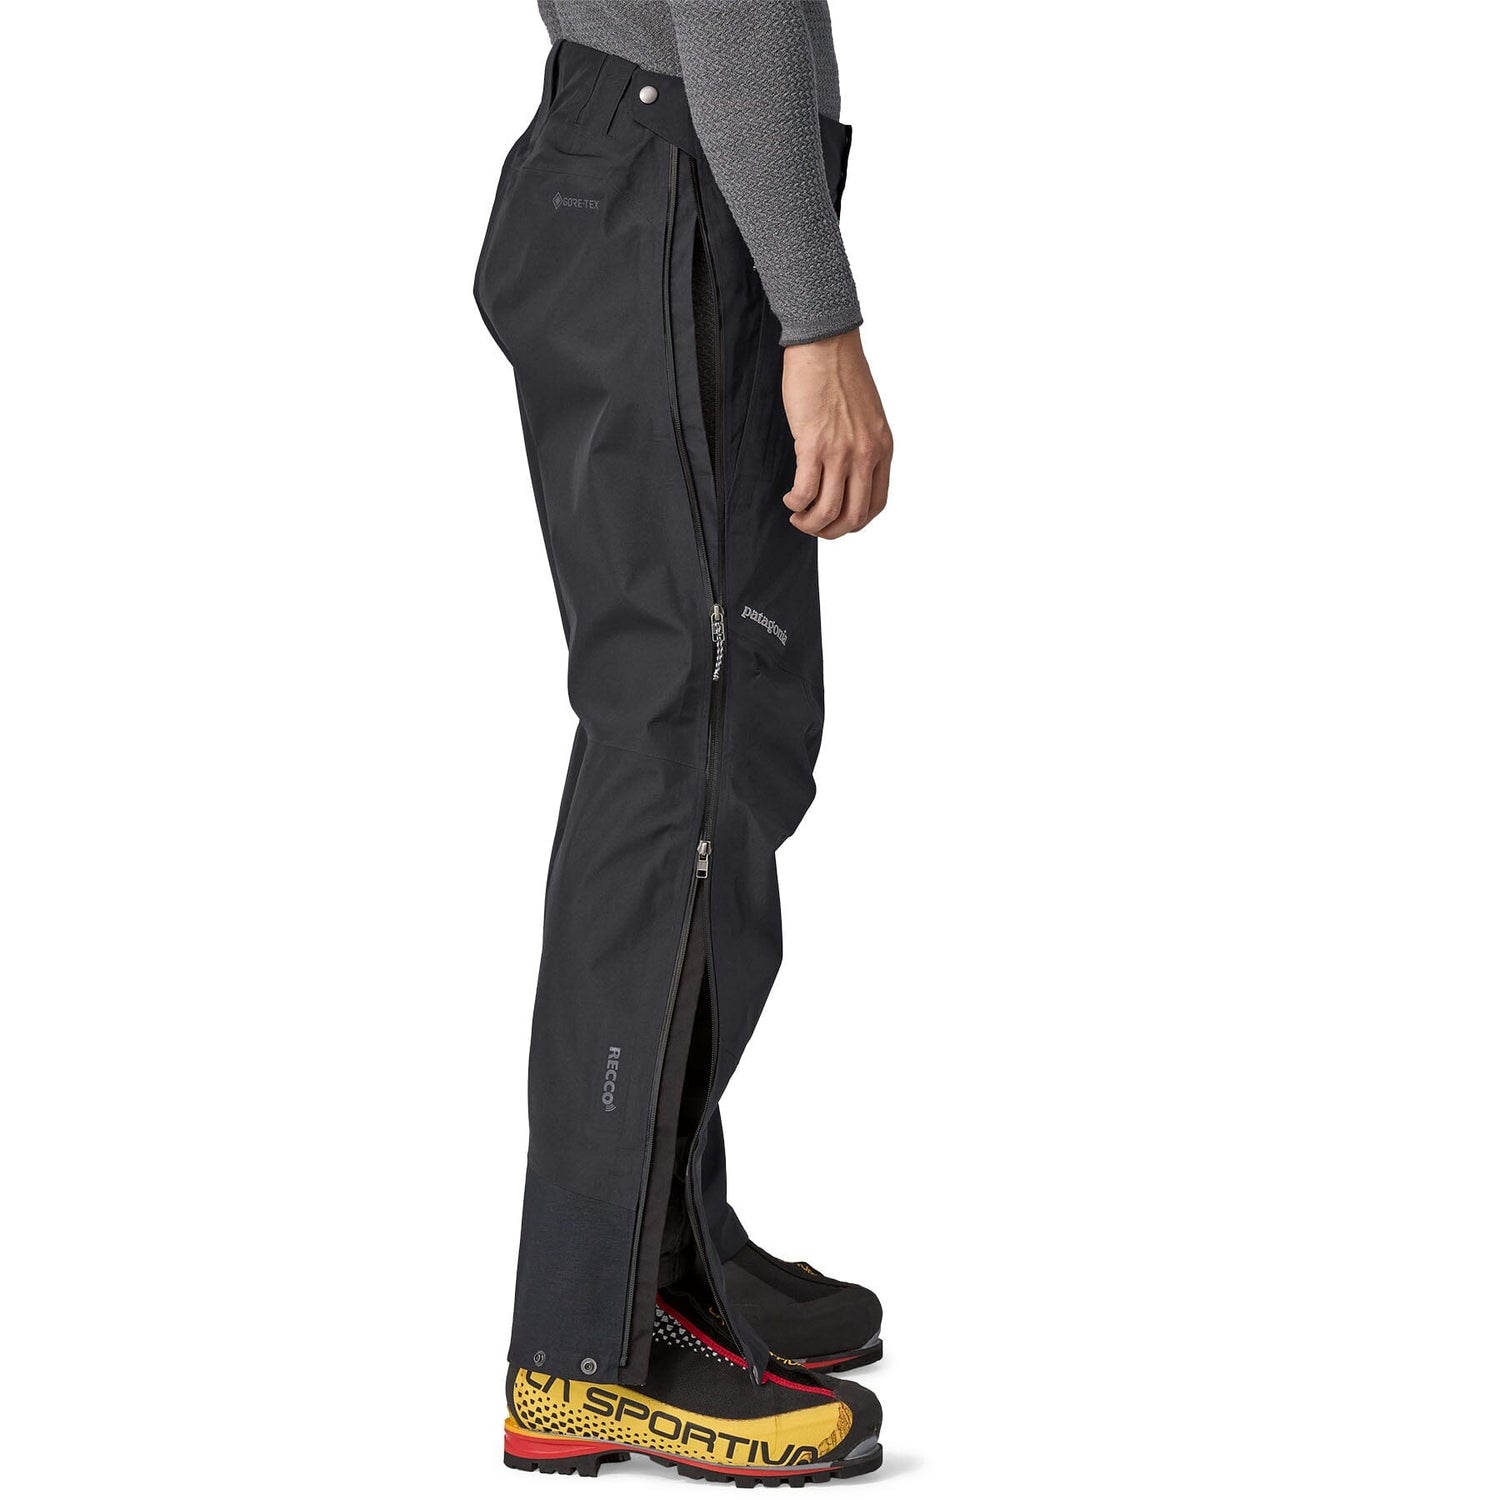 Patagonia M's Triolet Pants - Recycled Polyester & Recycled Nylon